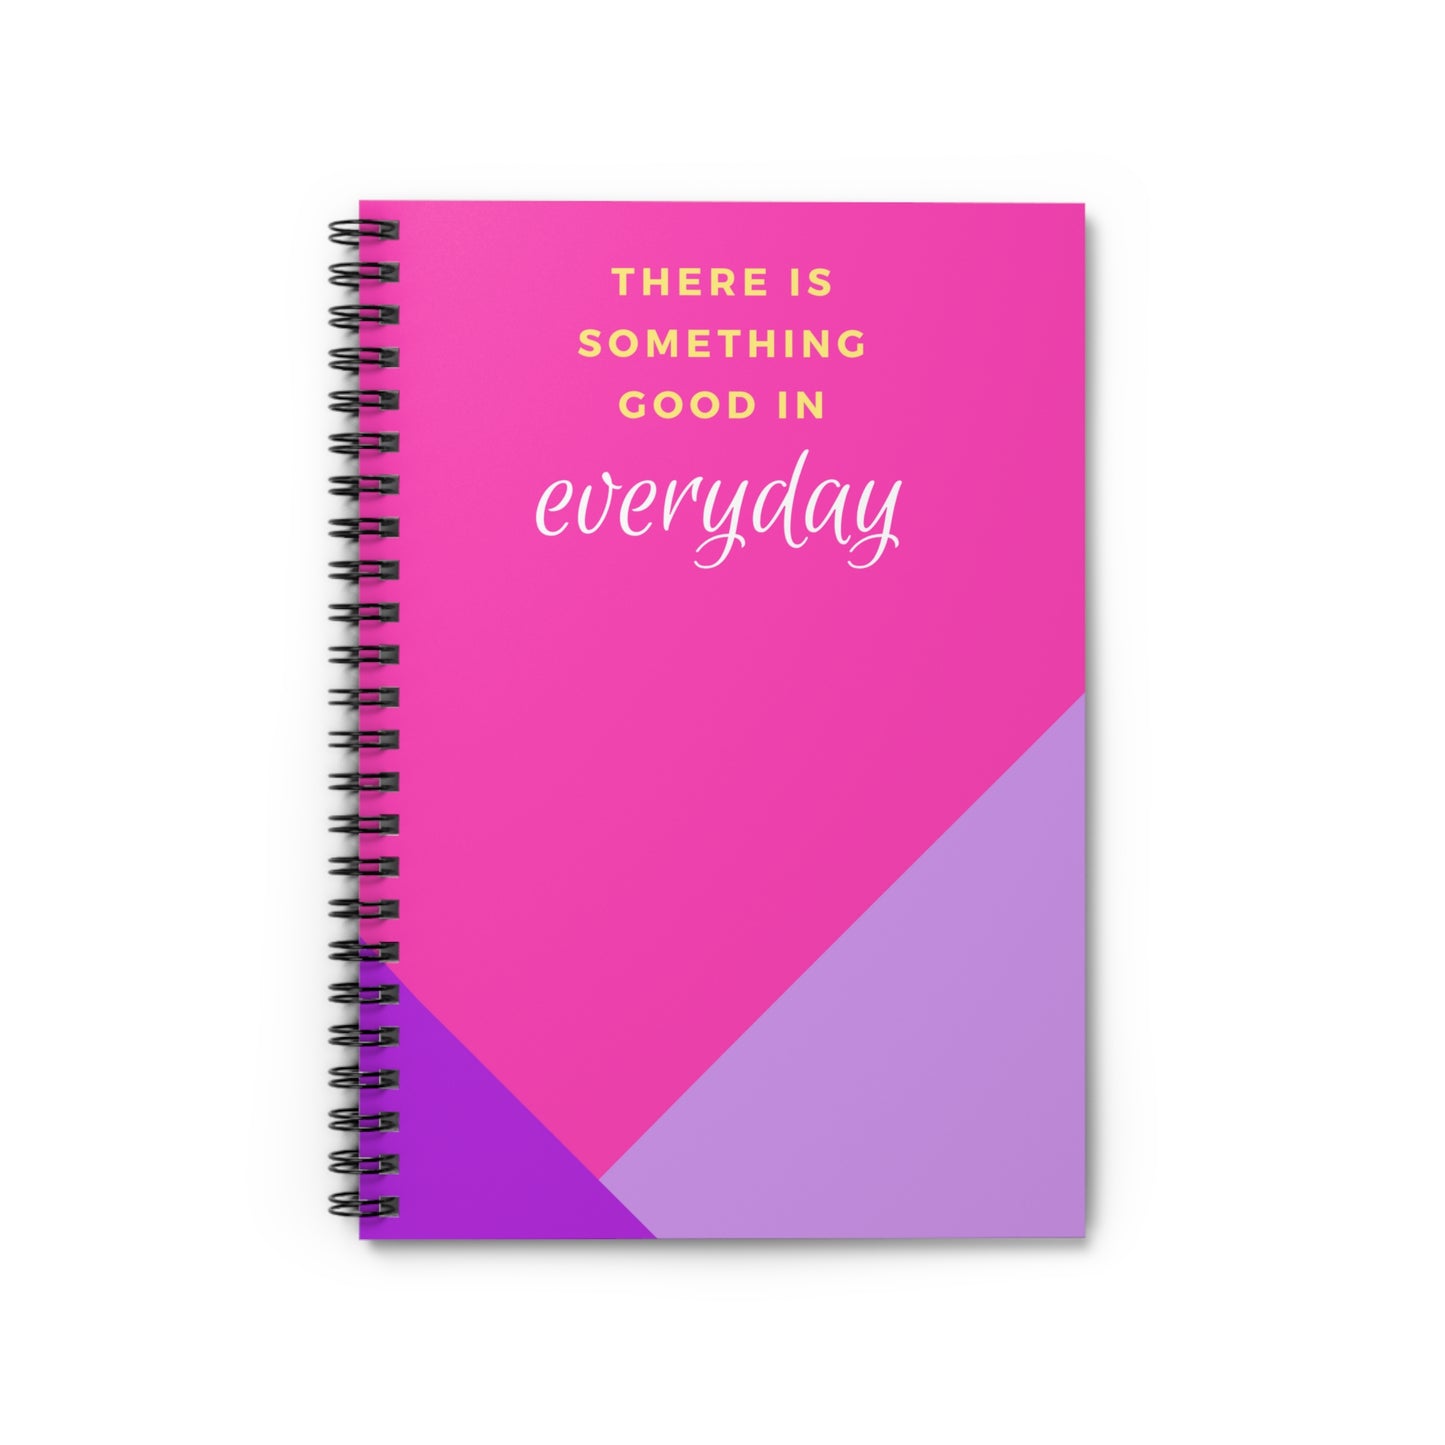 There's Something Good in Everyday Spiral Notebook